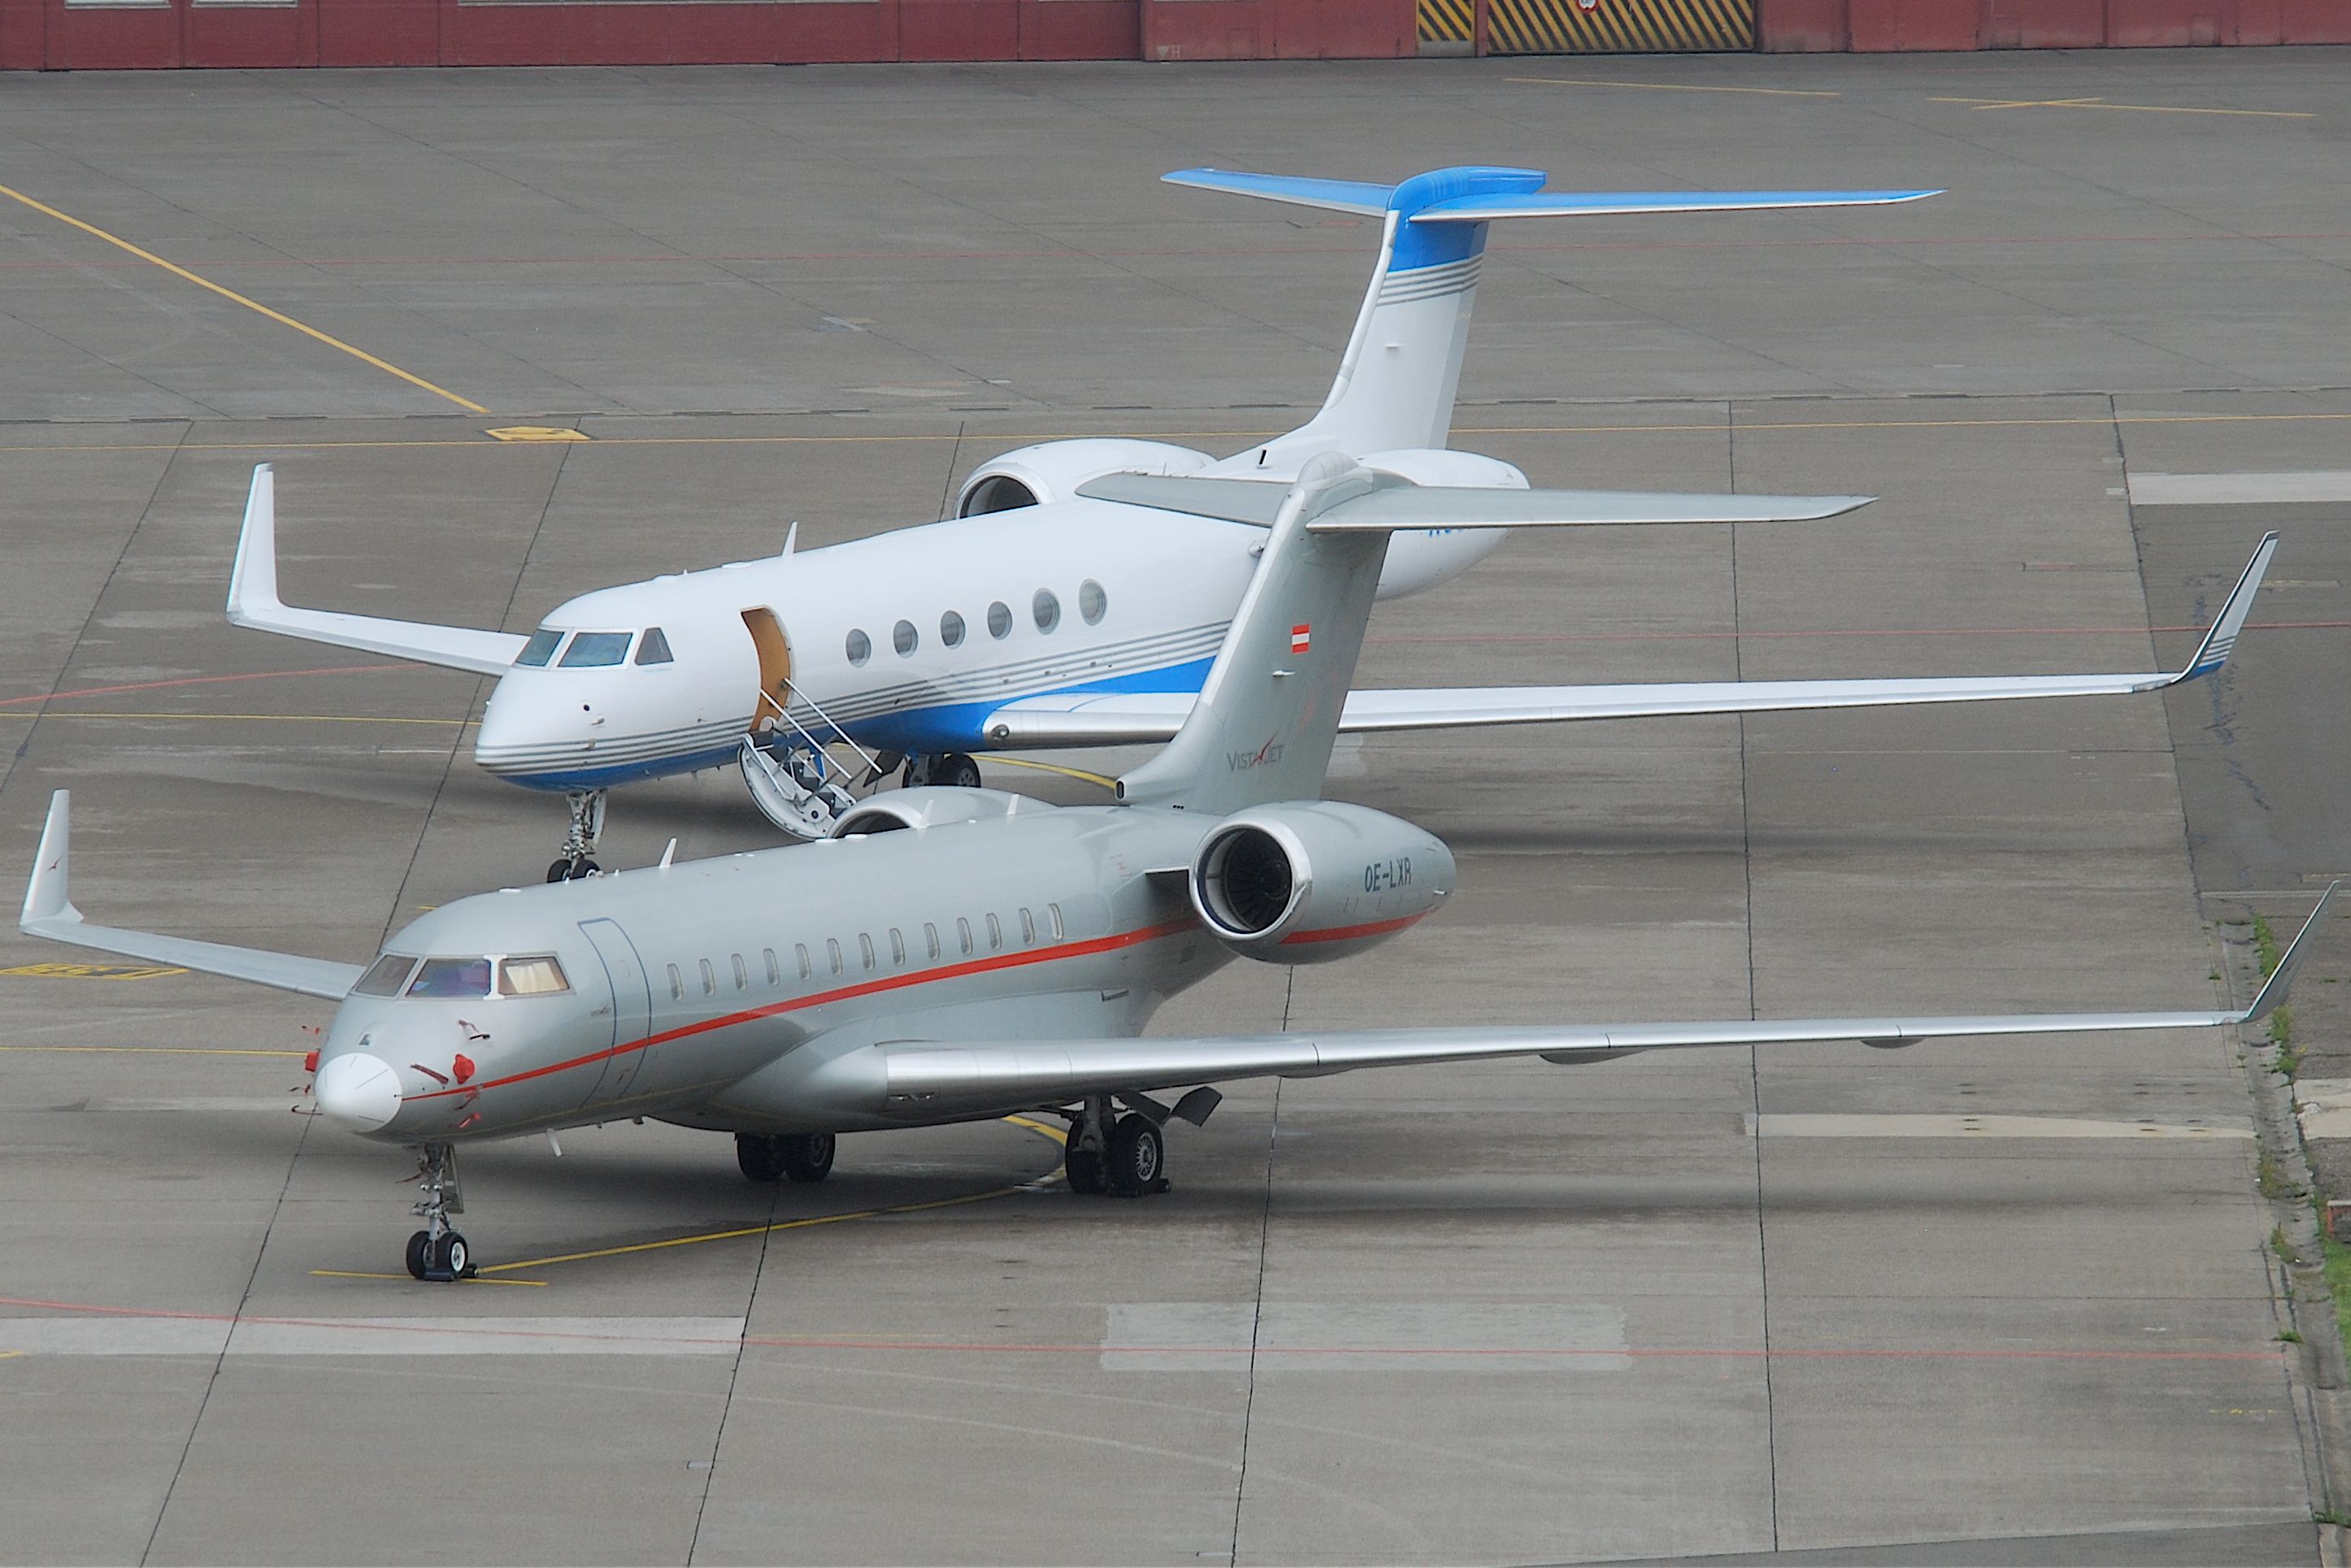 Two private jets on the ground at an unidentified airport.